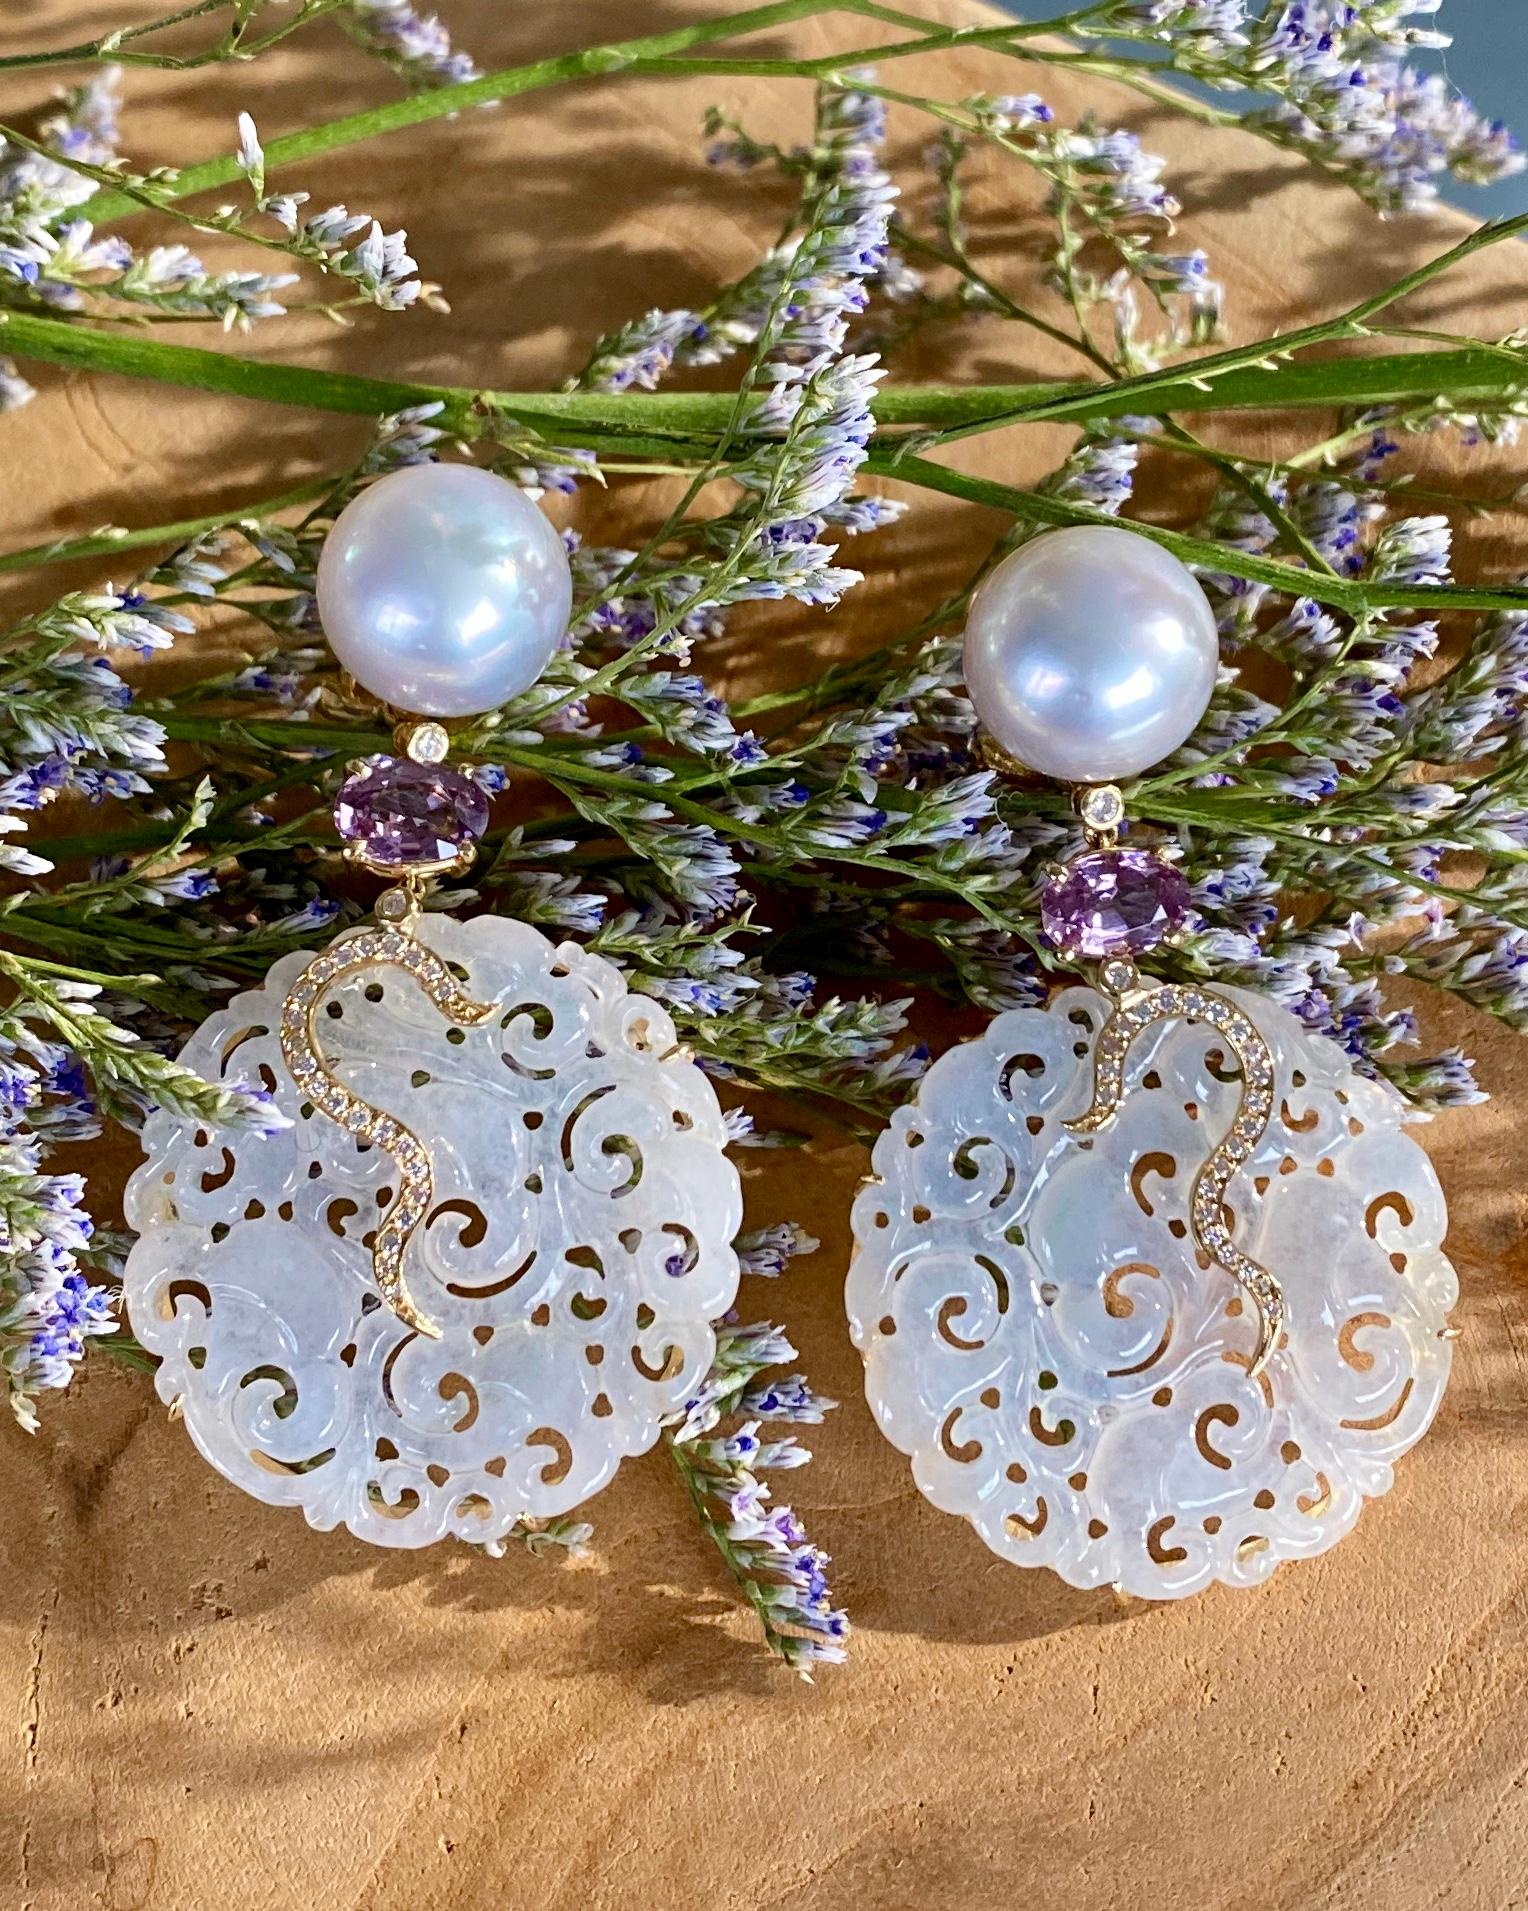 Earrings of carved white jade, white South Sea pearls, spinels and diamonds, handcrafted in 18 karat yellow gold.

A signature Joon Han piece, these beautiful one-of-a-kind carved white jade earrings with diamond details are exquisite. These dangle